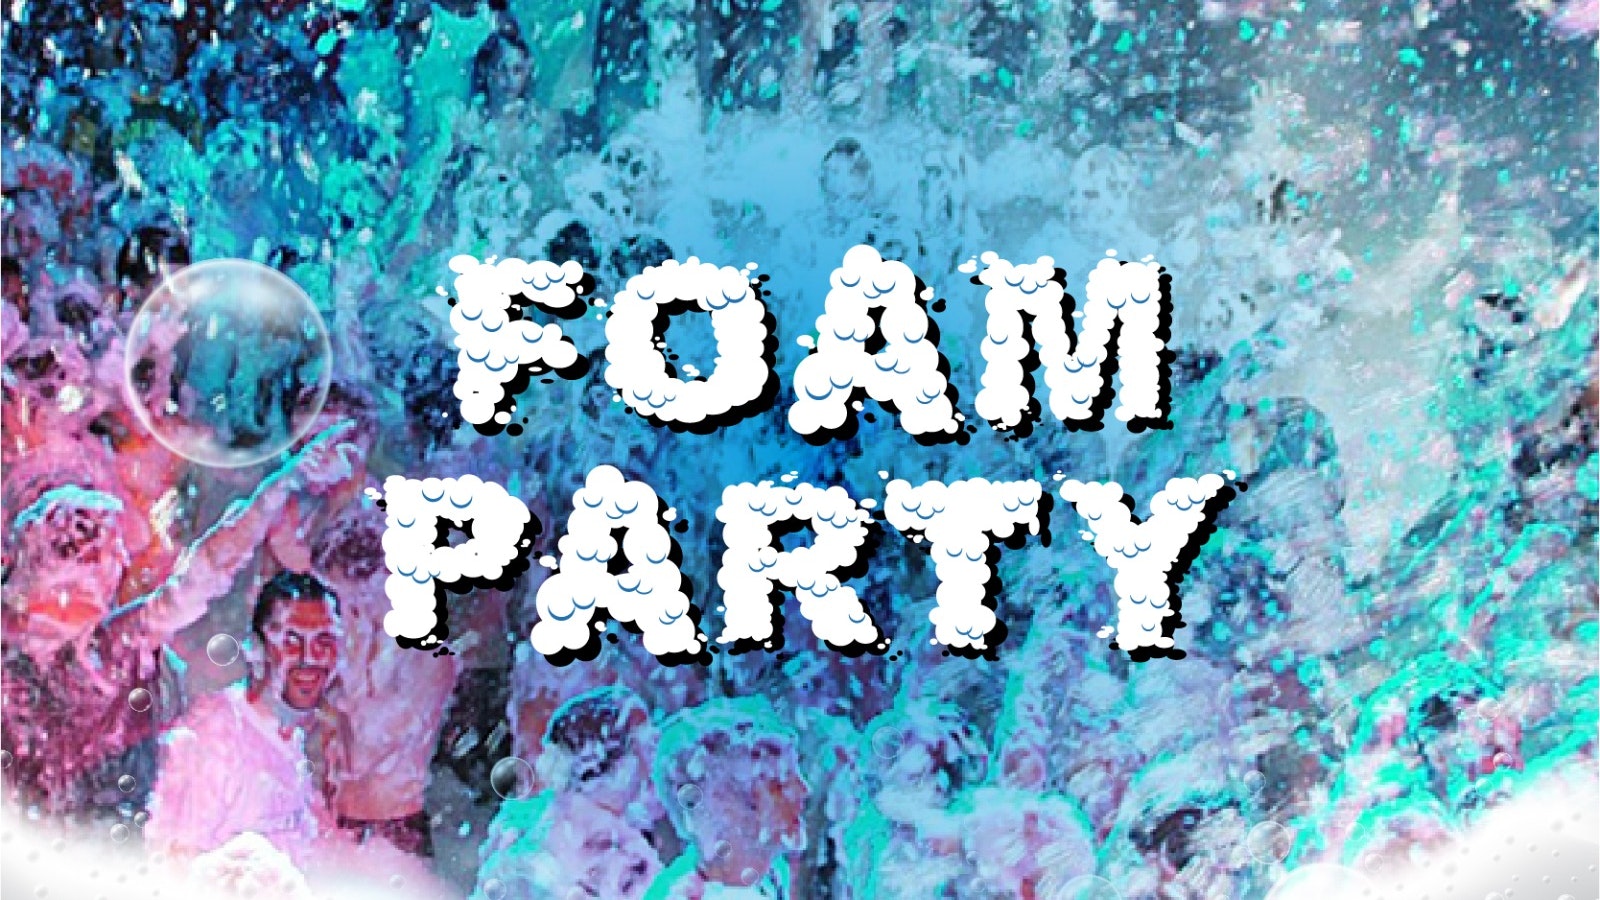 FOAM Party – Wednesday 29th September